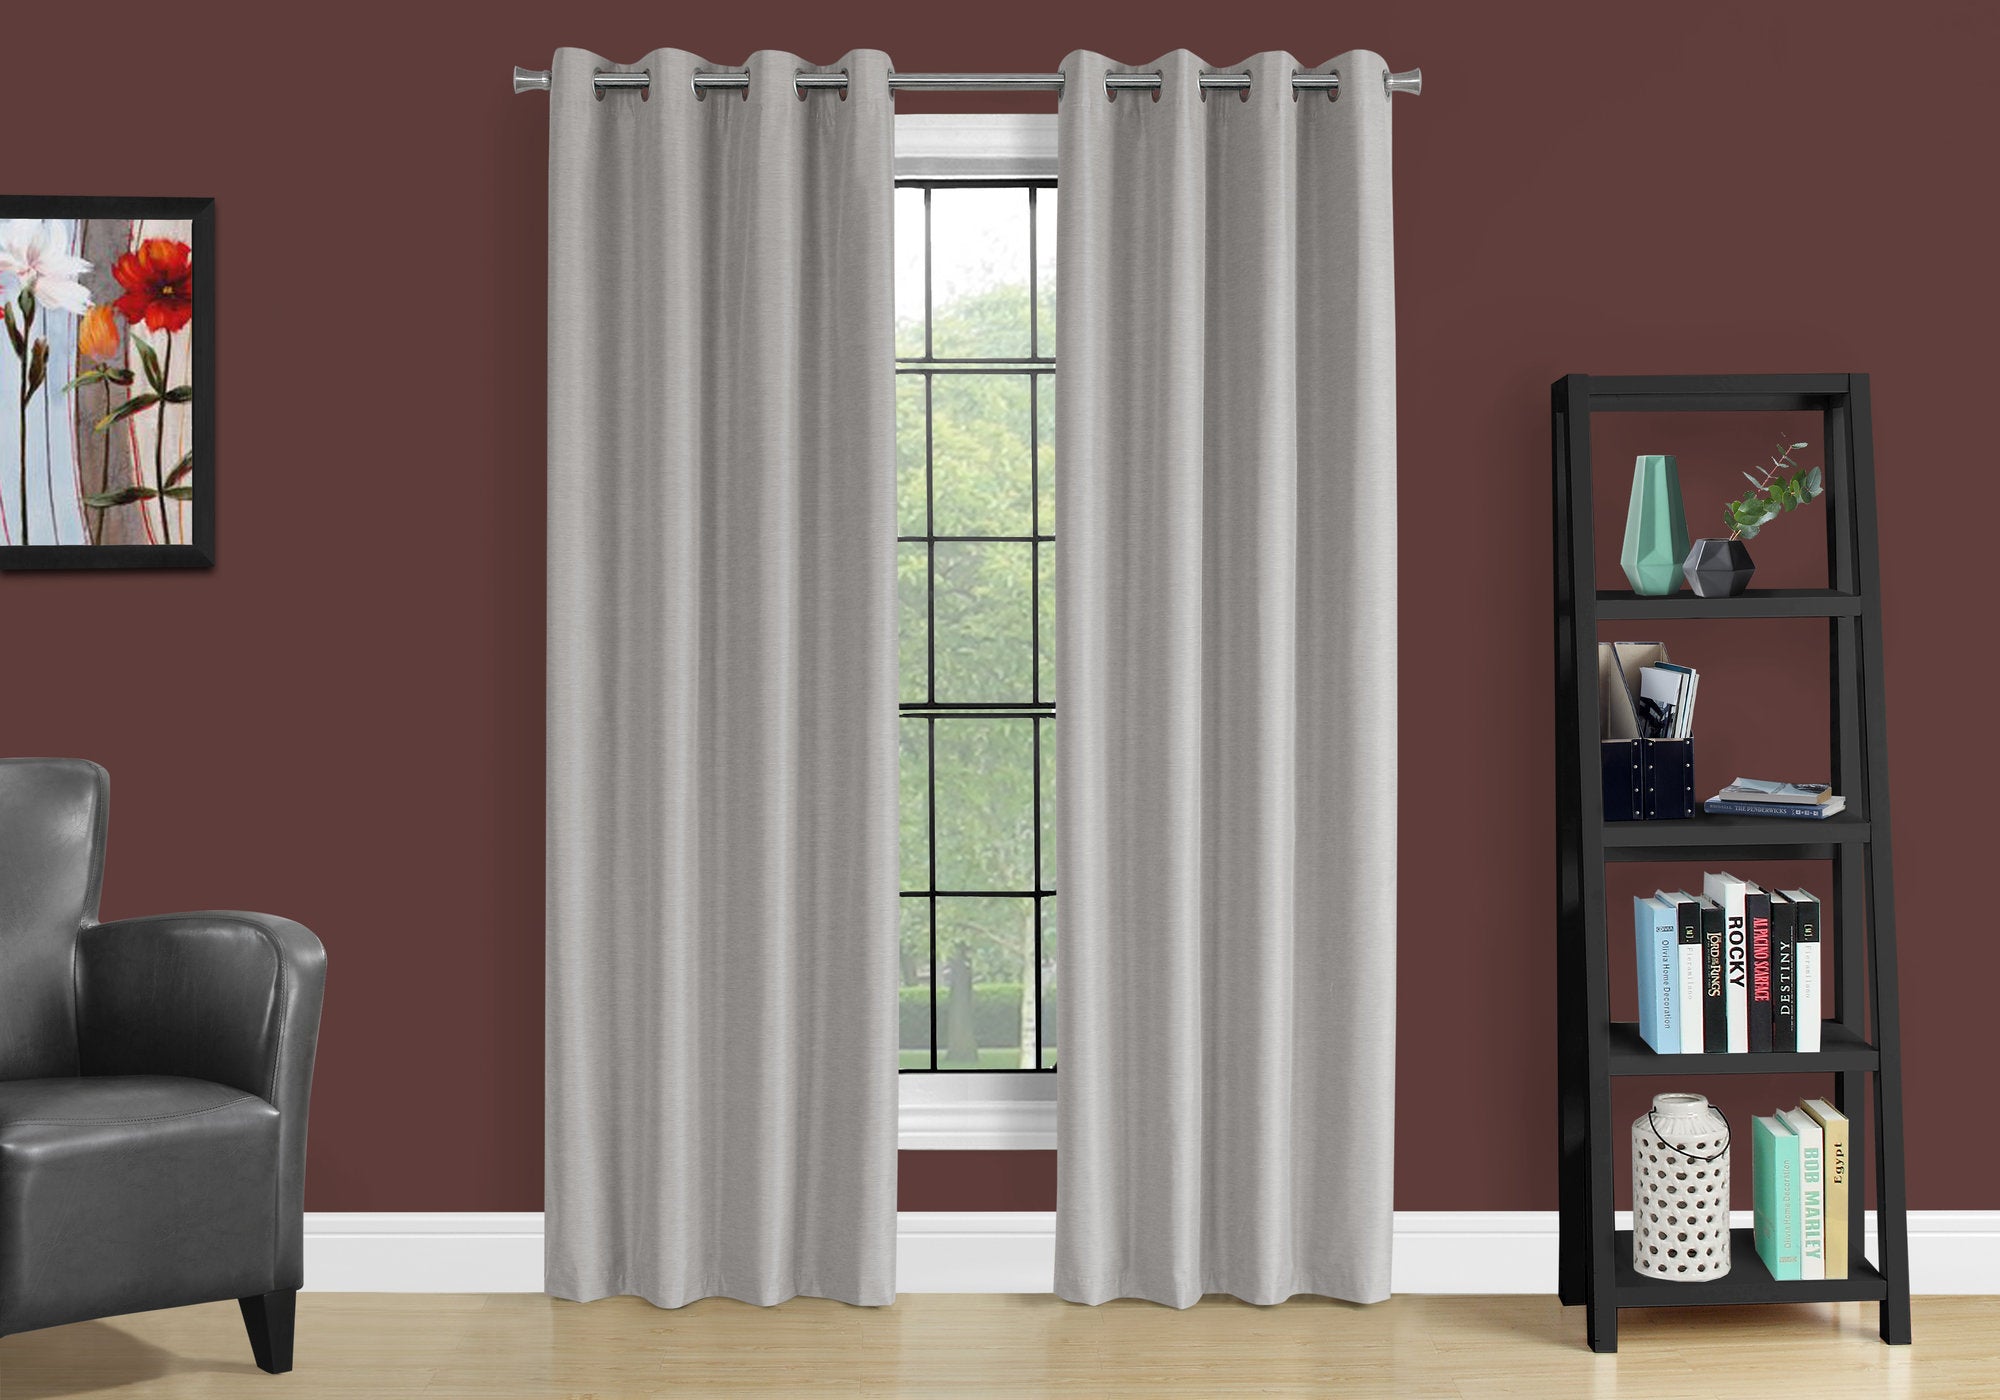 MN-989836    Curtain Panel, 2Pcs Set, 54"W X 95"L, 100% Blackout, Grommet, Living Room, Bedroom, Kitchen, Thermal Insulation Fabric, Polyester Full Light Blocking Fabric, Silver, Contemporary, Modern